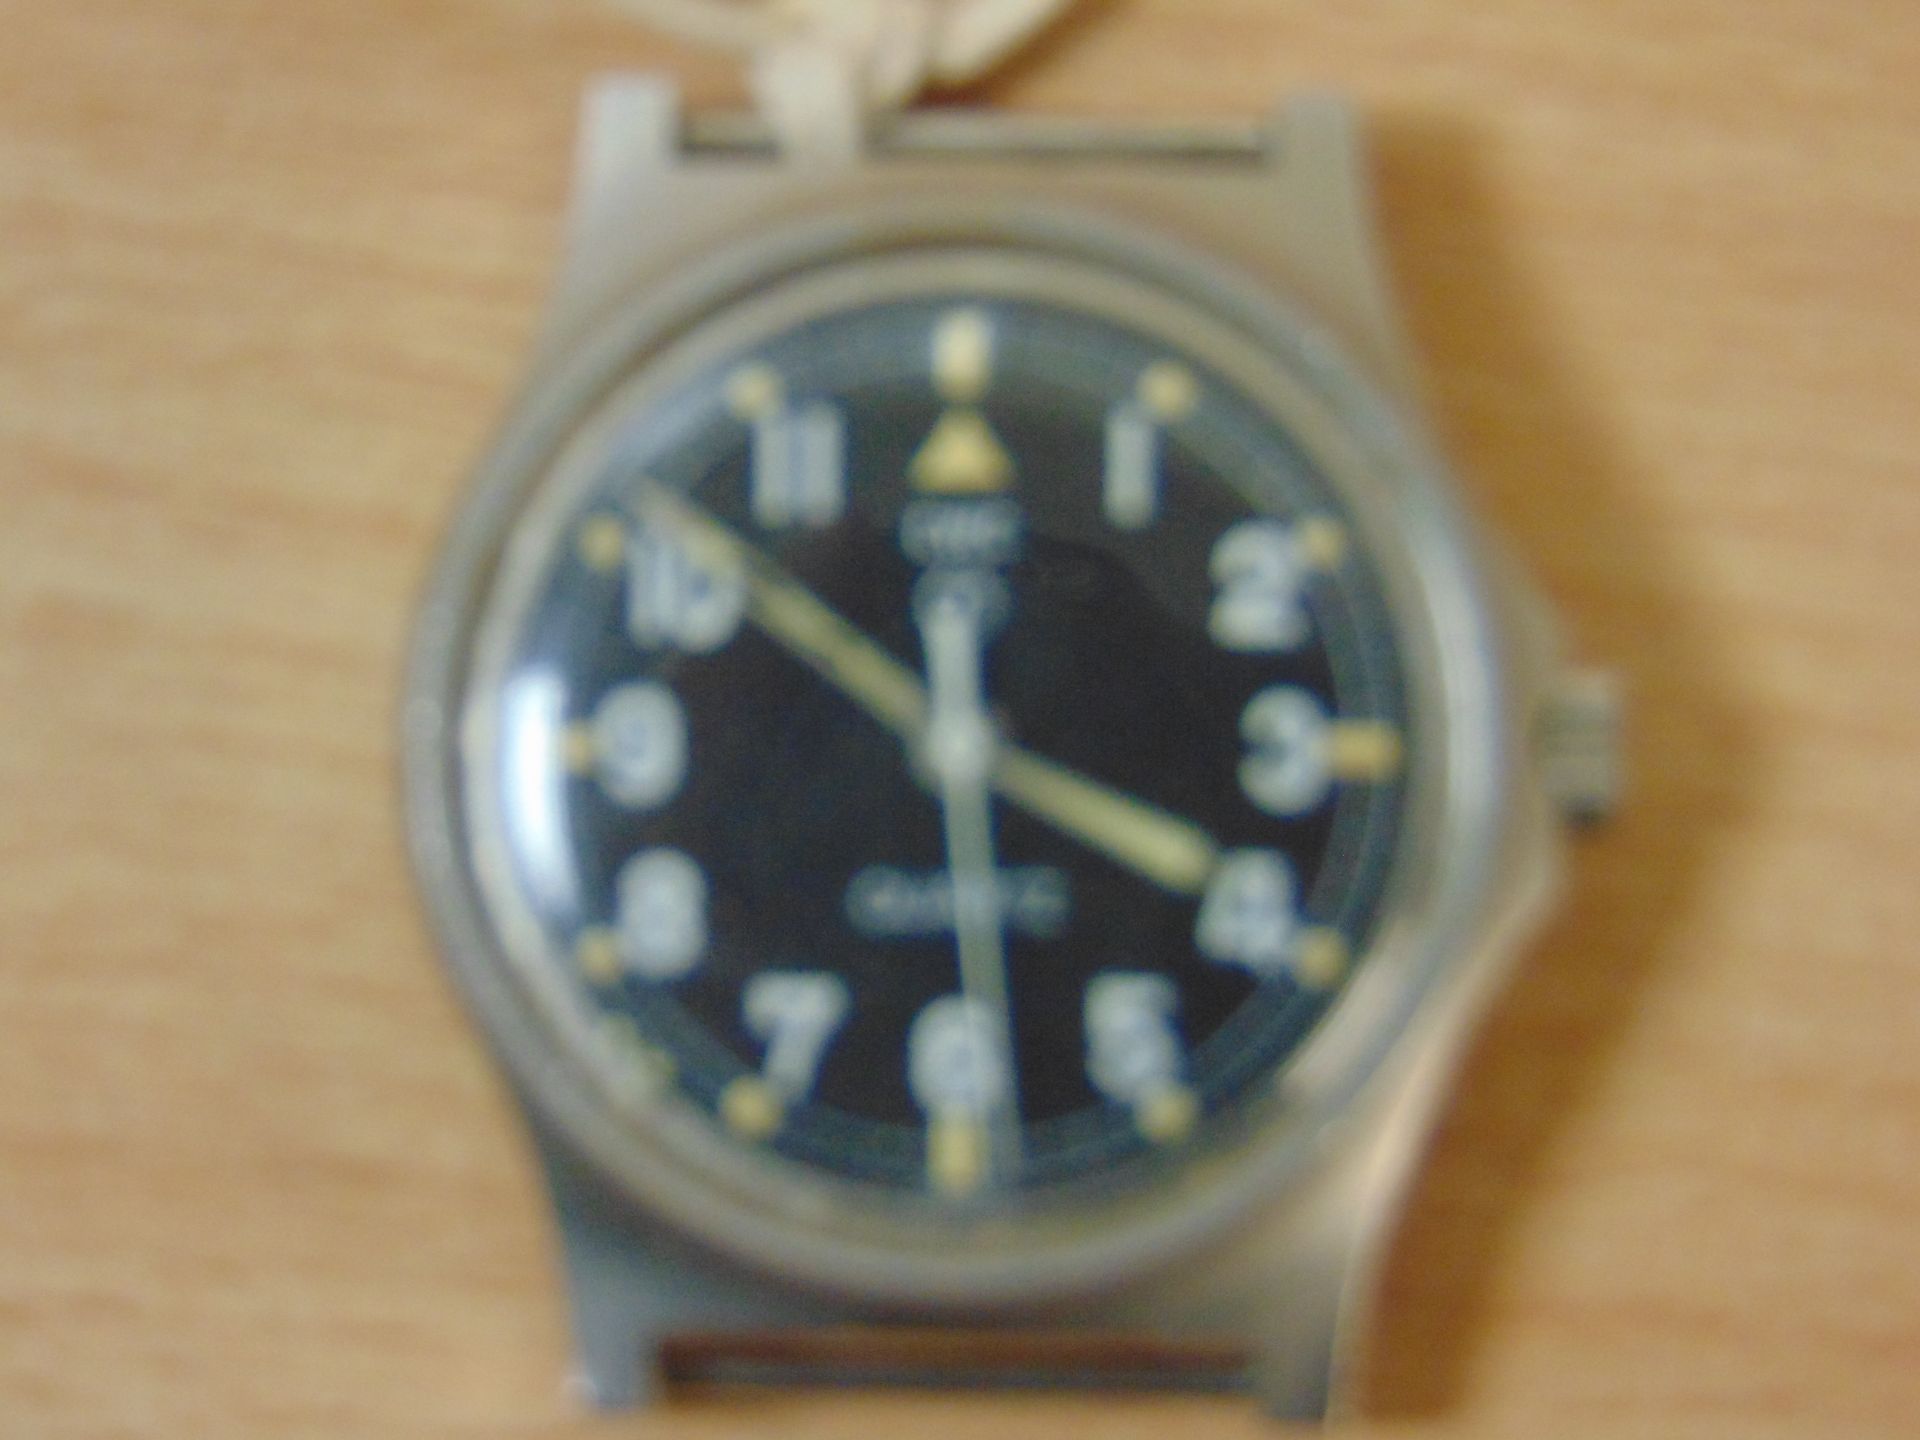 VERY RARE CWC FAT BOY SERVICE WATCH NATO NUMBERS BROAD ARROW DATED 1980. - Image 6 of 6